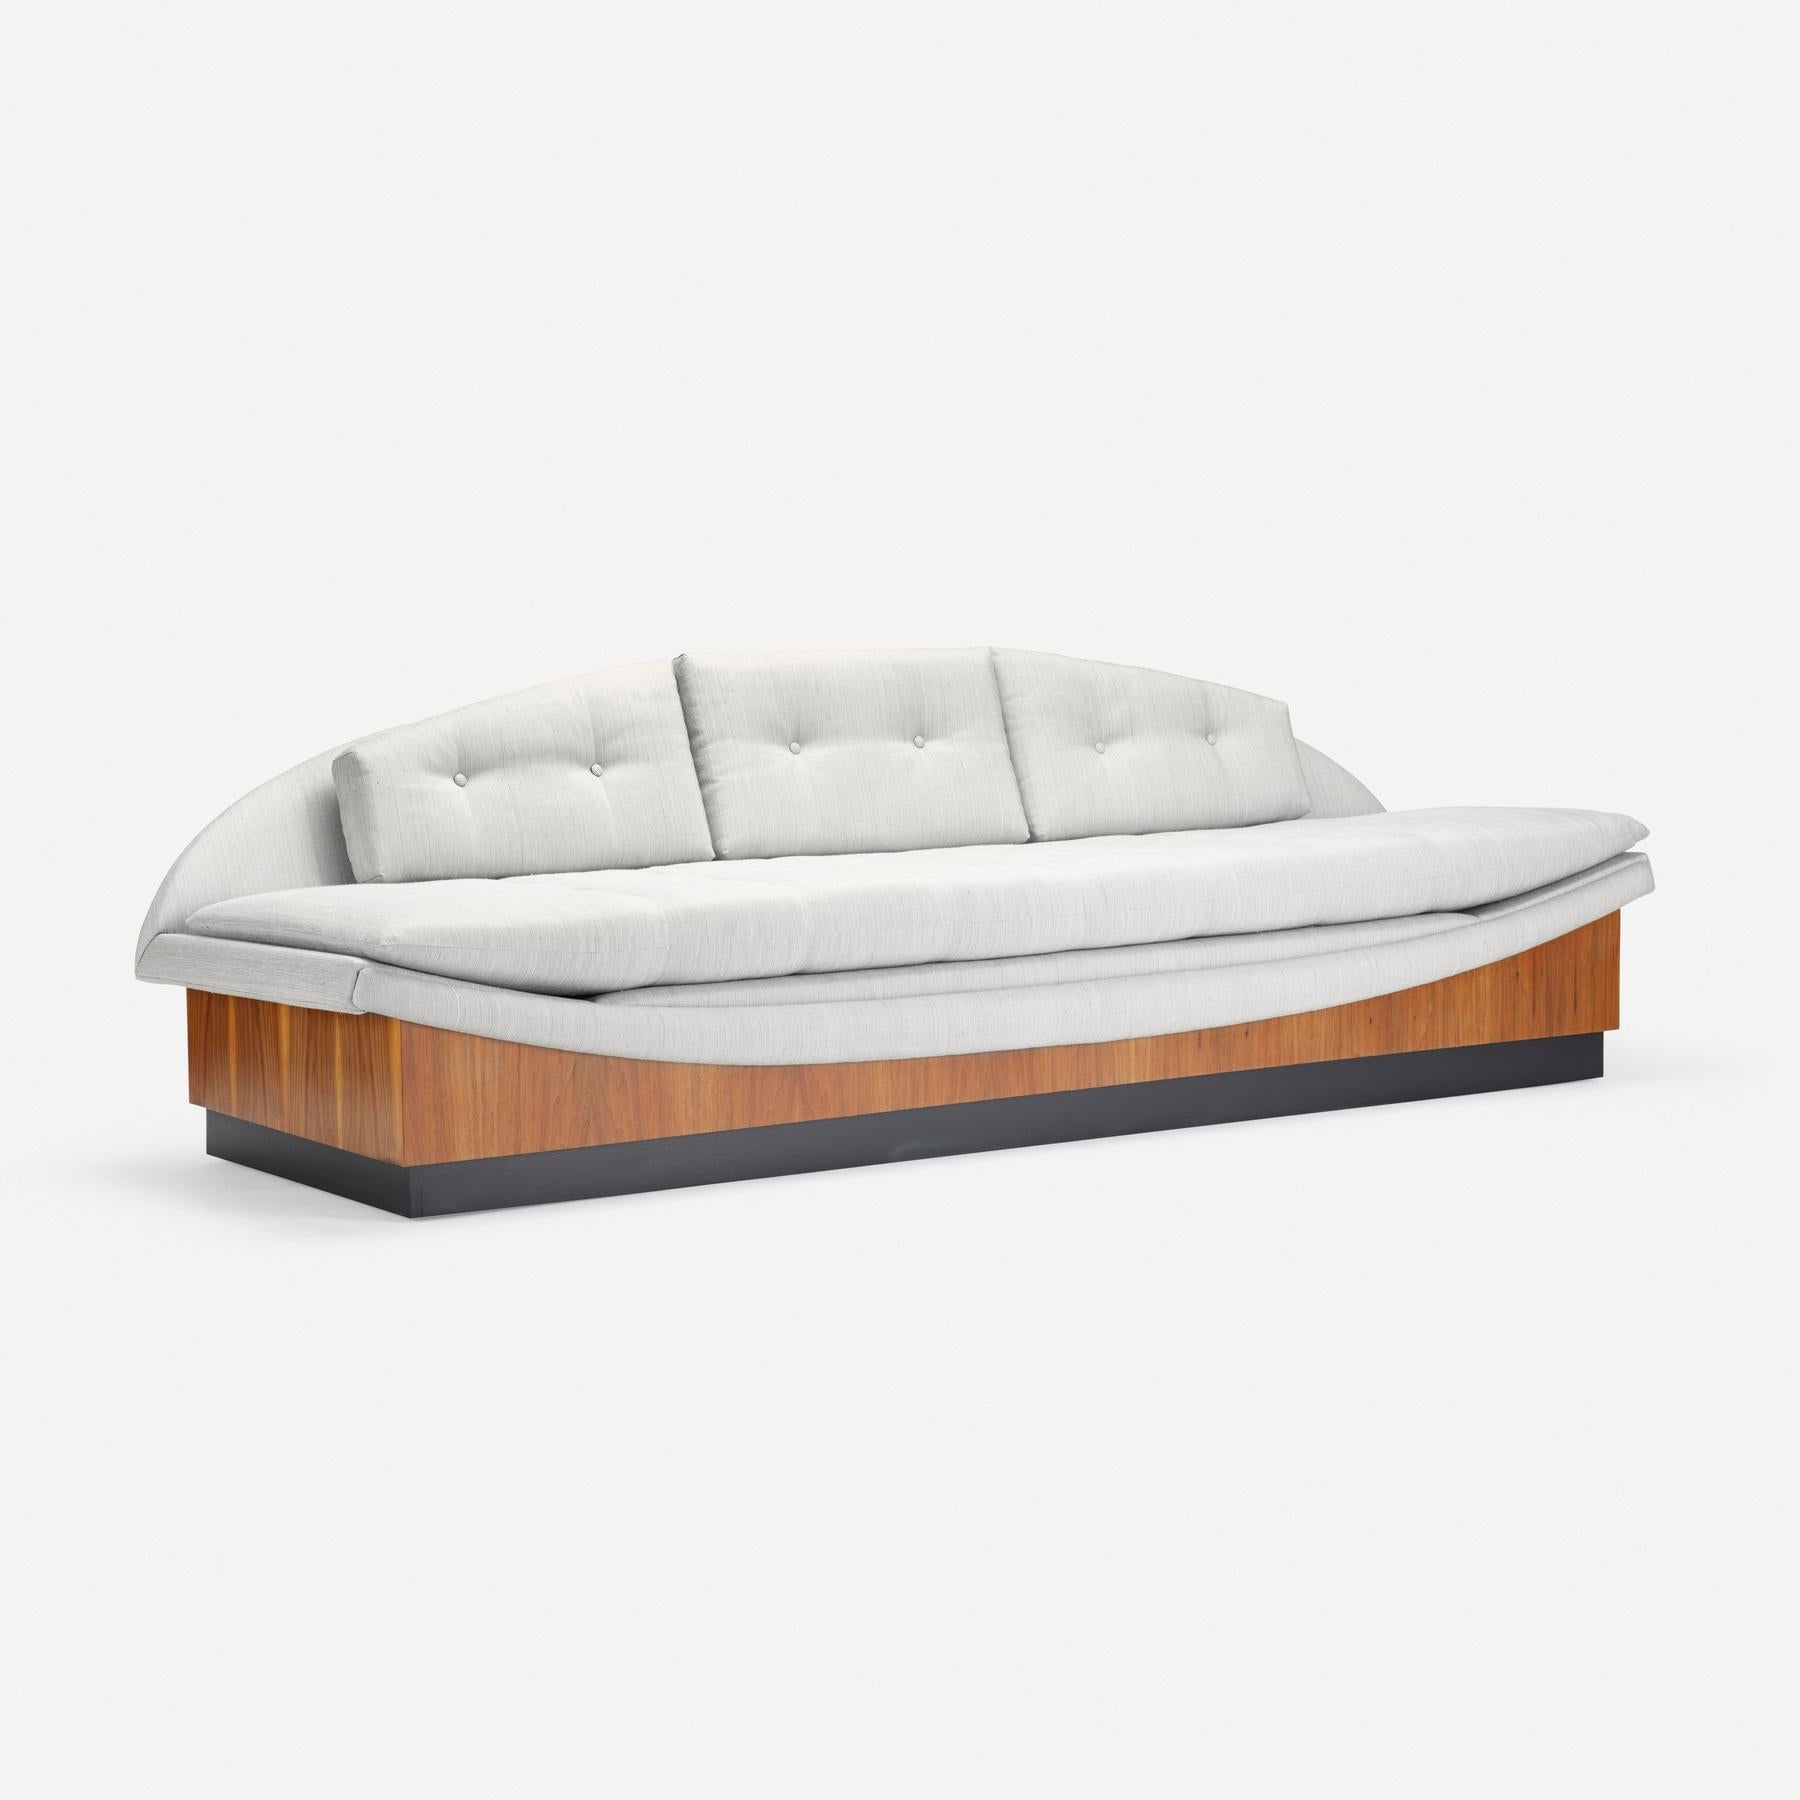 A magnificent seating form is carved into a teak platform which floats atop a black plinth. Designed by Adrian Pearsall for Craft Associates, this floating gondola sofa